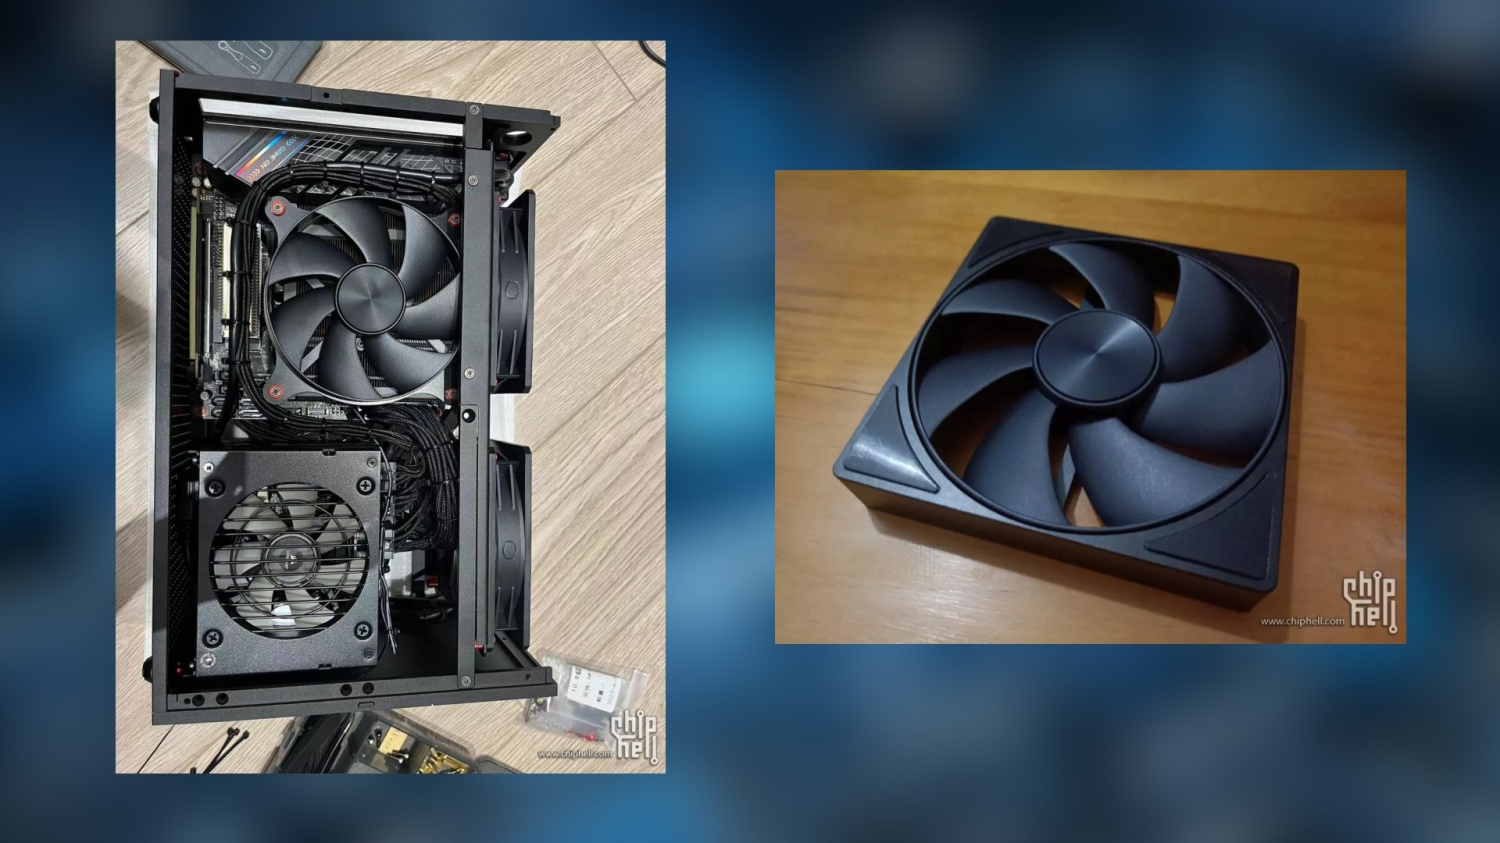 TweakTown Enlarged Image - GeForce RTX 4090 axial fans used to cool a CPU, image credit: Chiphell.